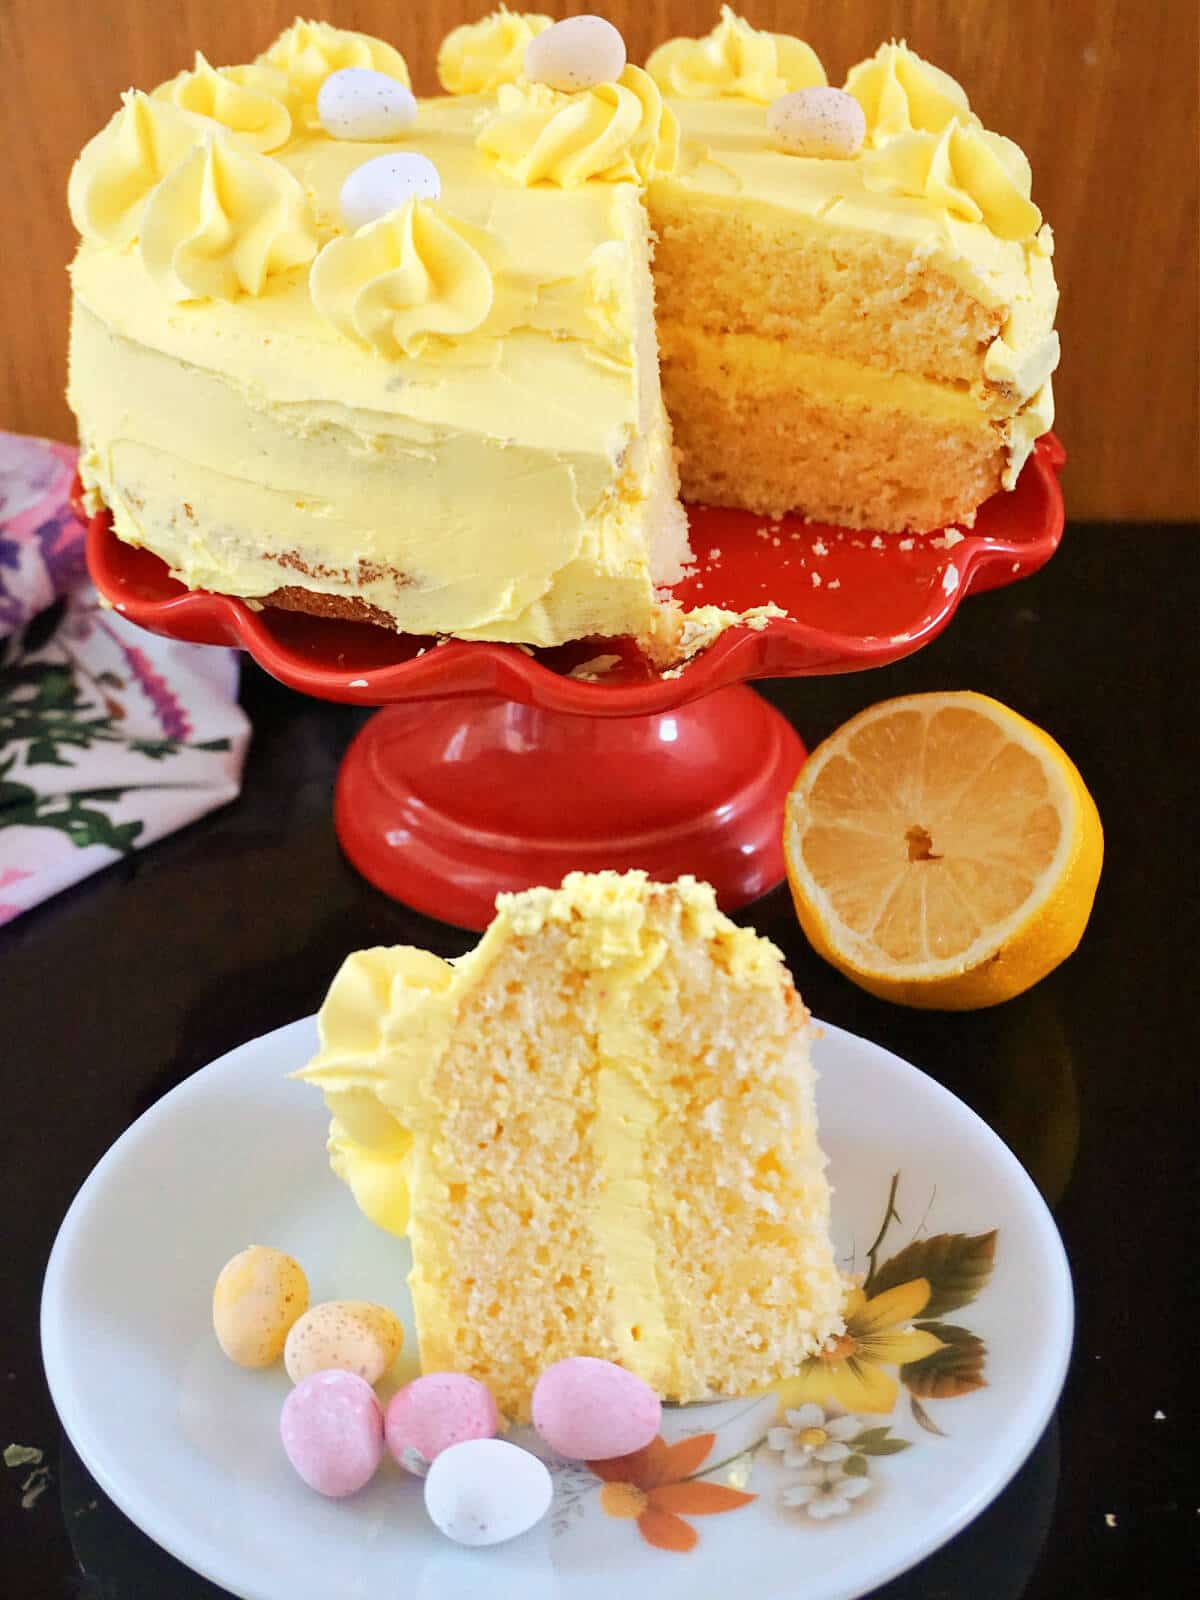 A slice of lemon cake on a white plate with more cake on a red cake stand in the background.